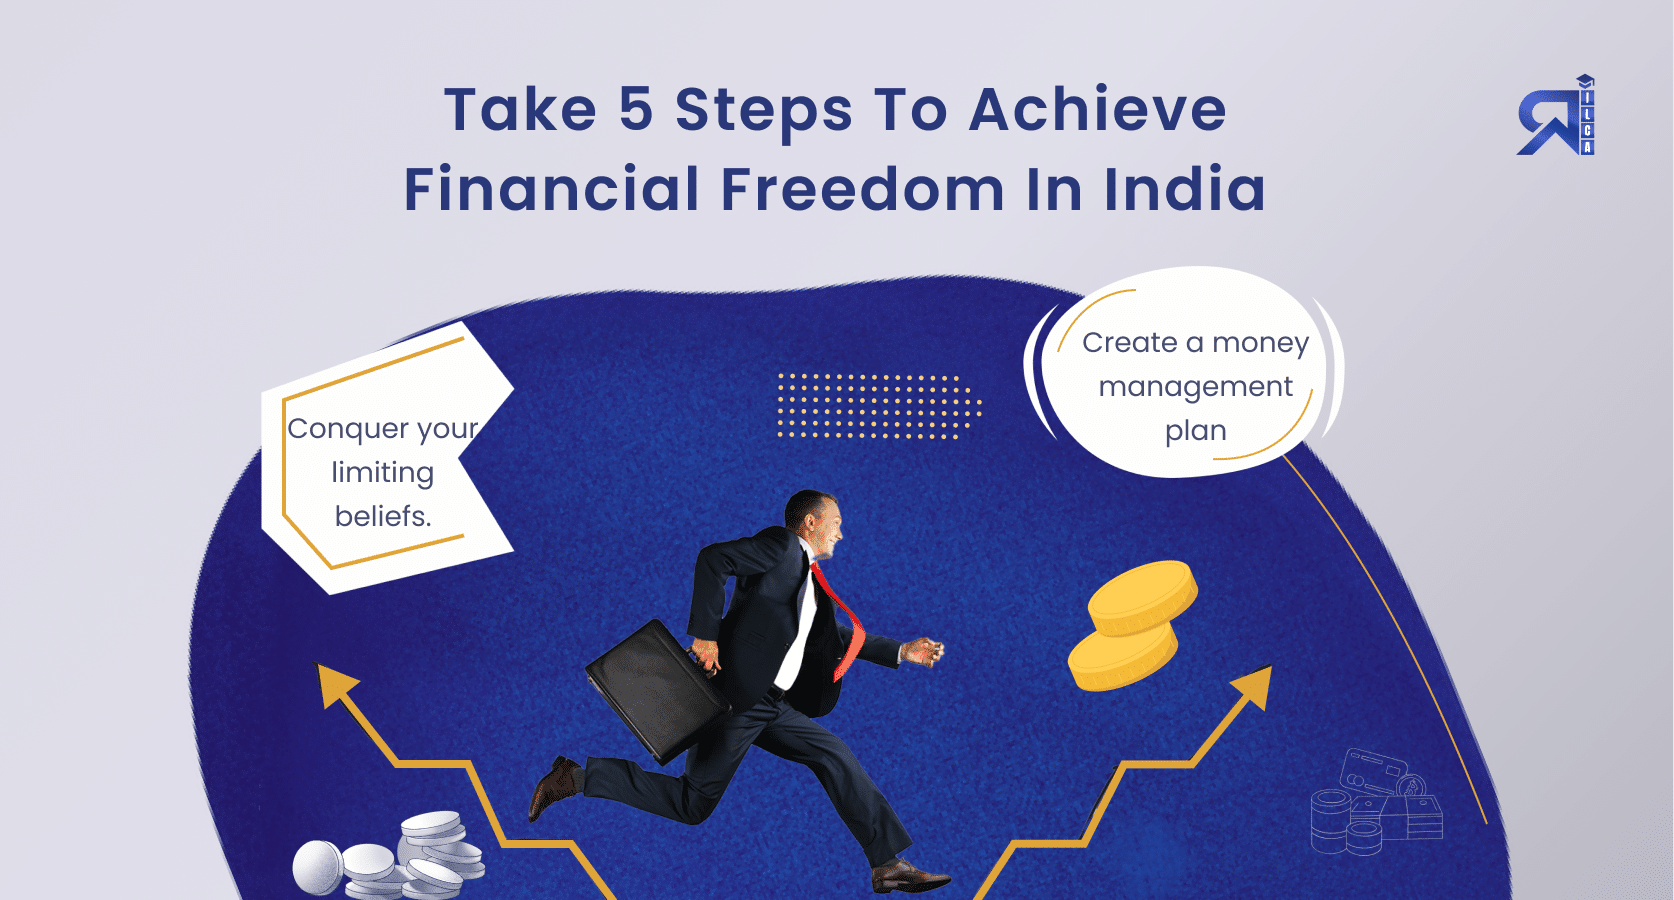 Take these 5 steps to achieve financial freedom in India